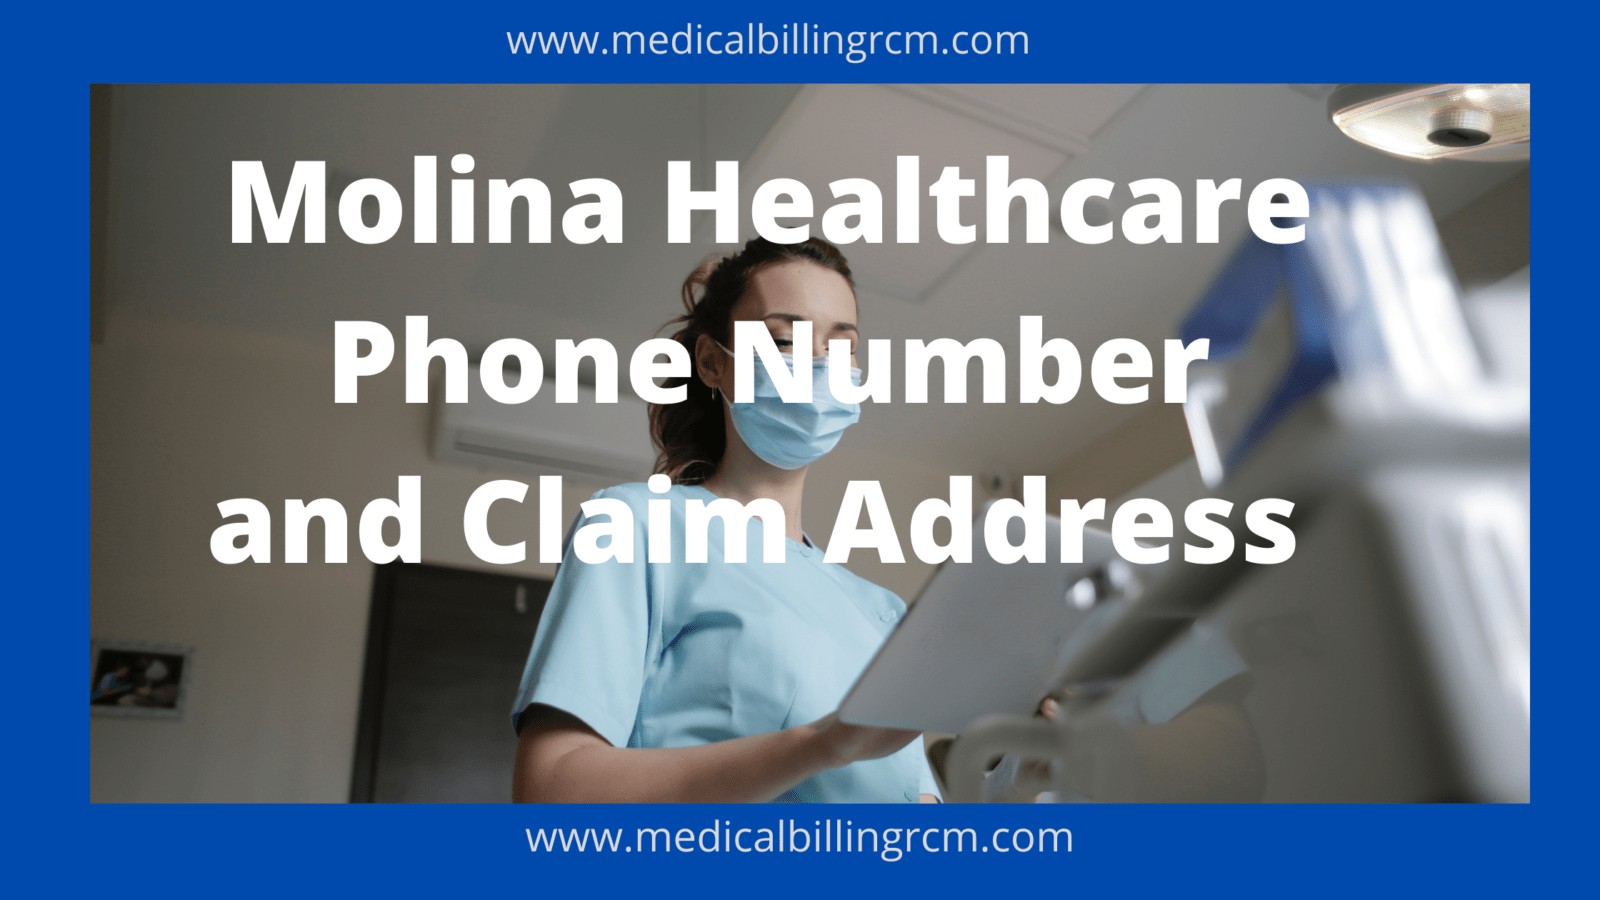 Molina Healthcare Phone numbers and claim addresses